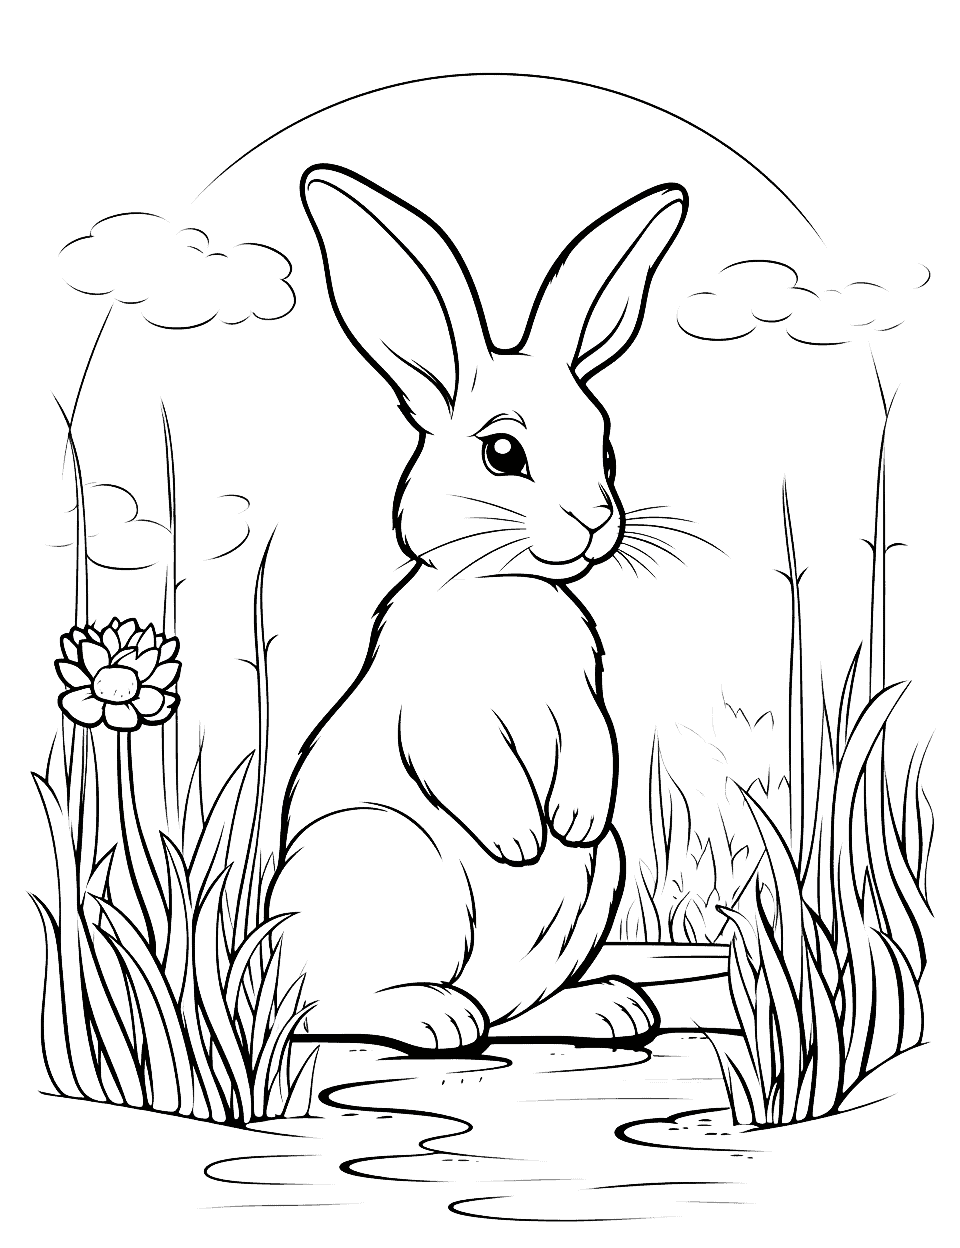 Beautiful Bunny By the Lake Coloring Page - A bunny near a calm lake, surrounded by long grass and a flower.